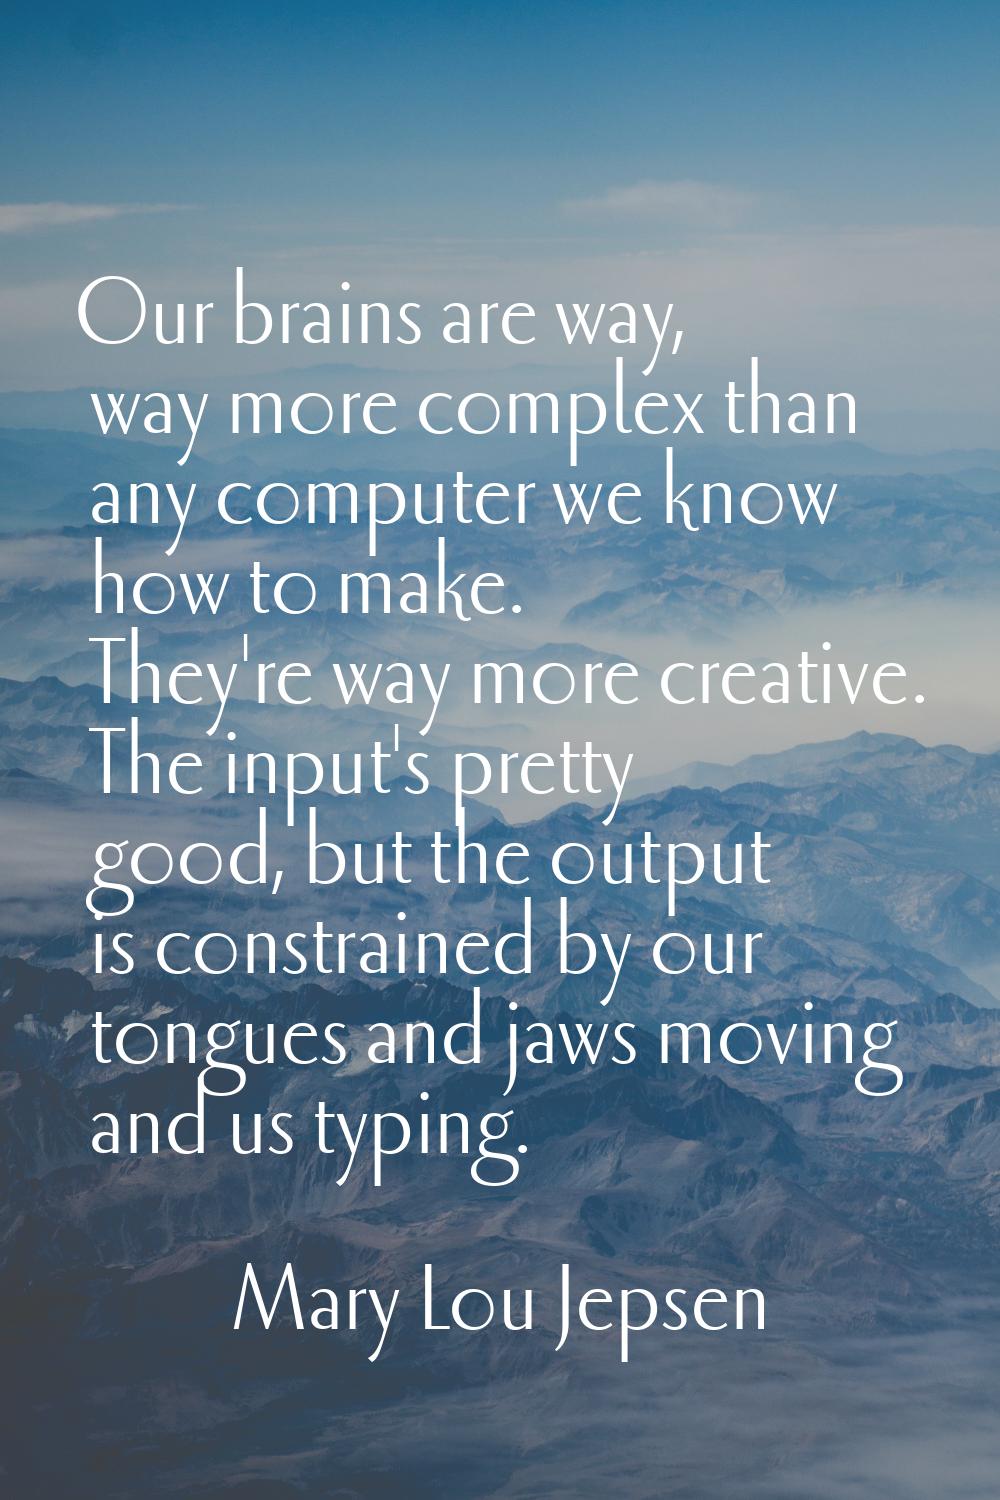 Our brains are way, way more complex than any computer we know how to make. They're way more creati